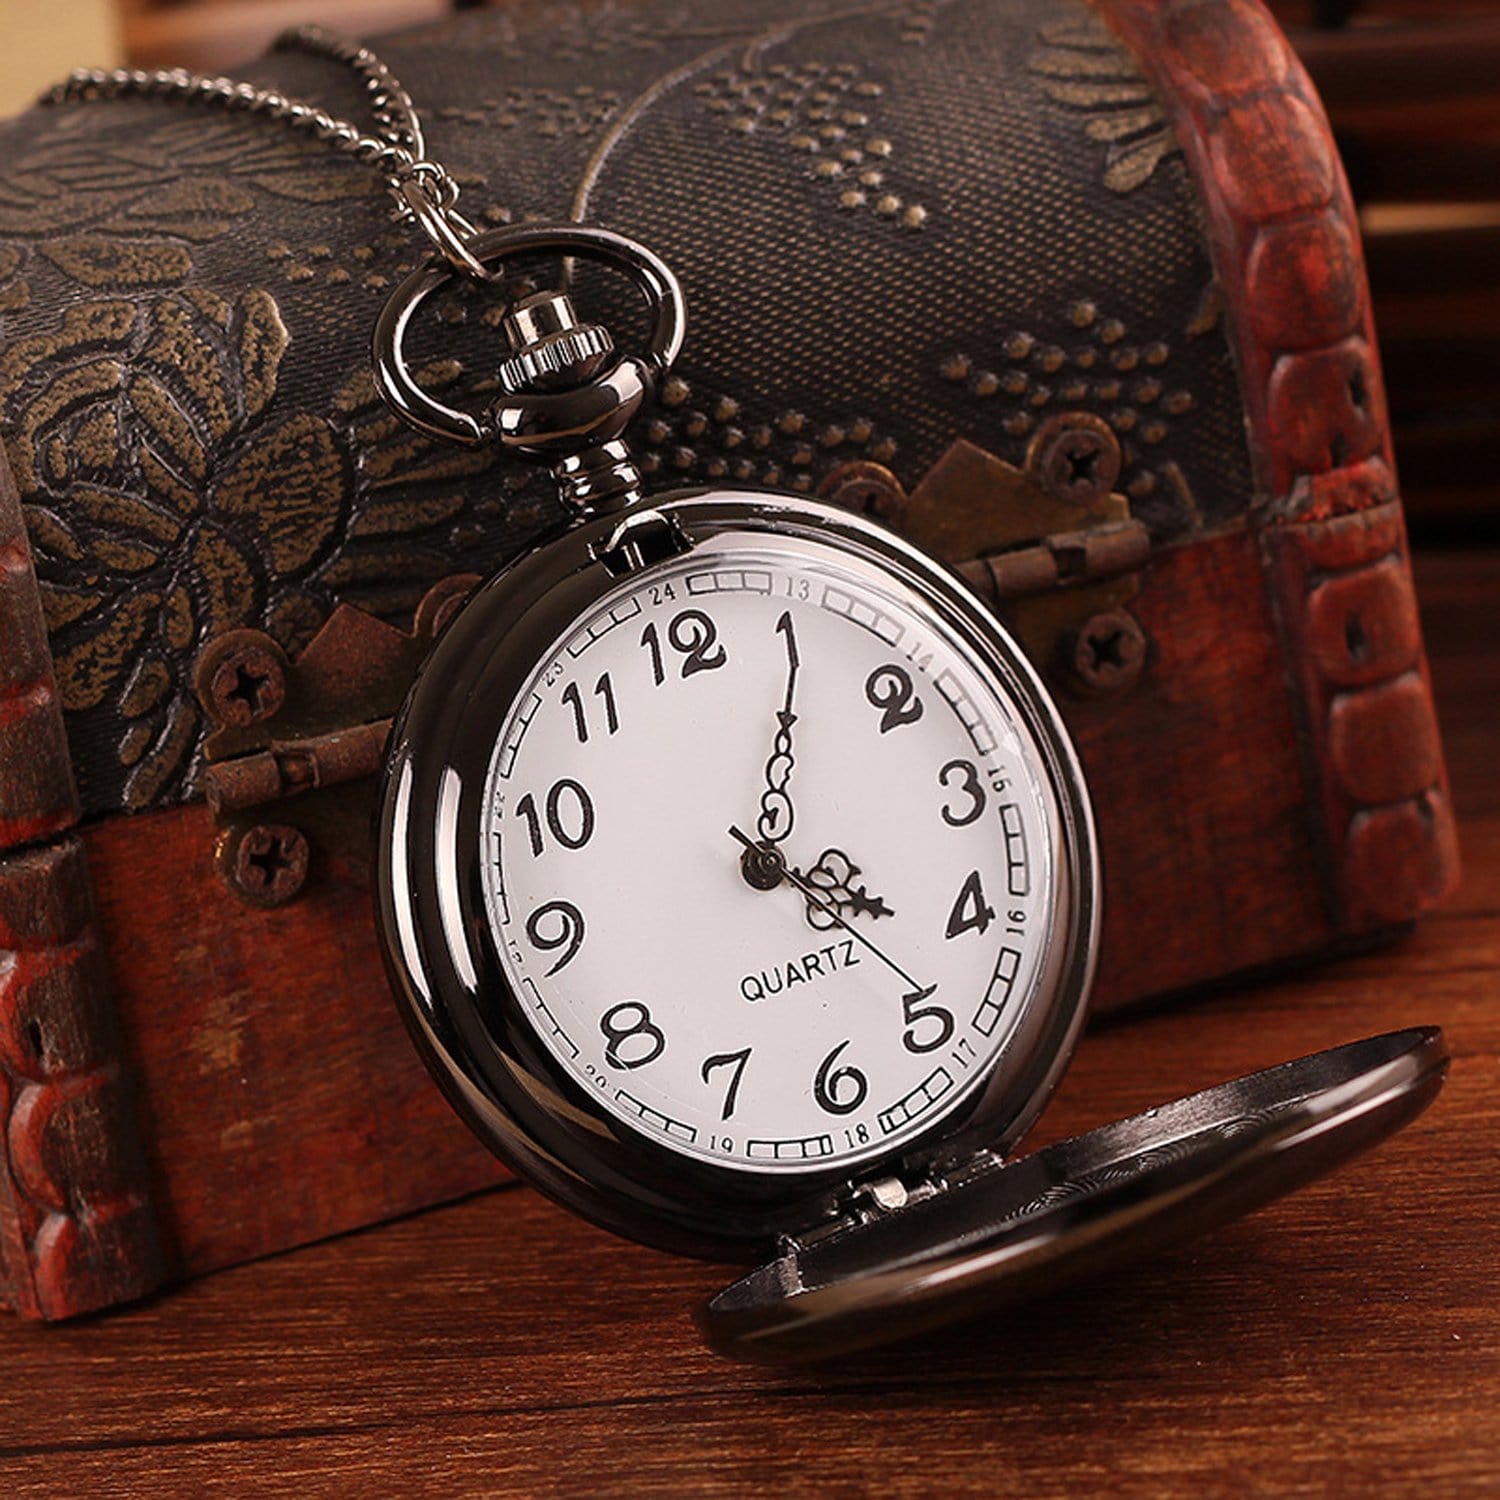 Pocket Watches To My Boyfriend - I Will Forever And Always Be Yours Pocket Watch GiveMe-Gifts